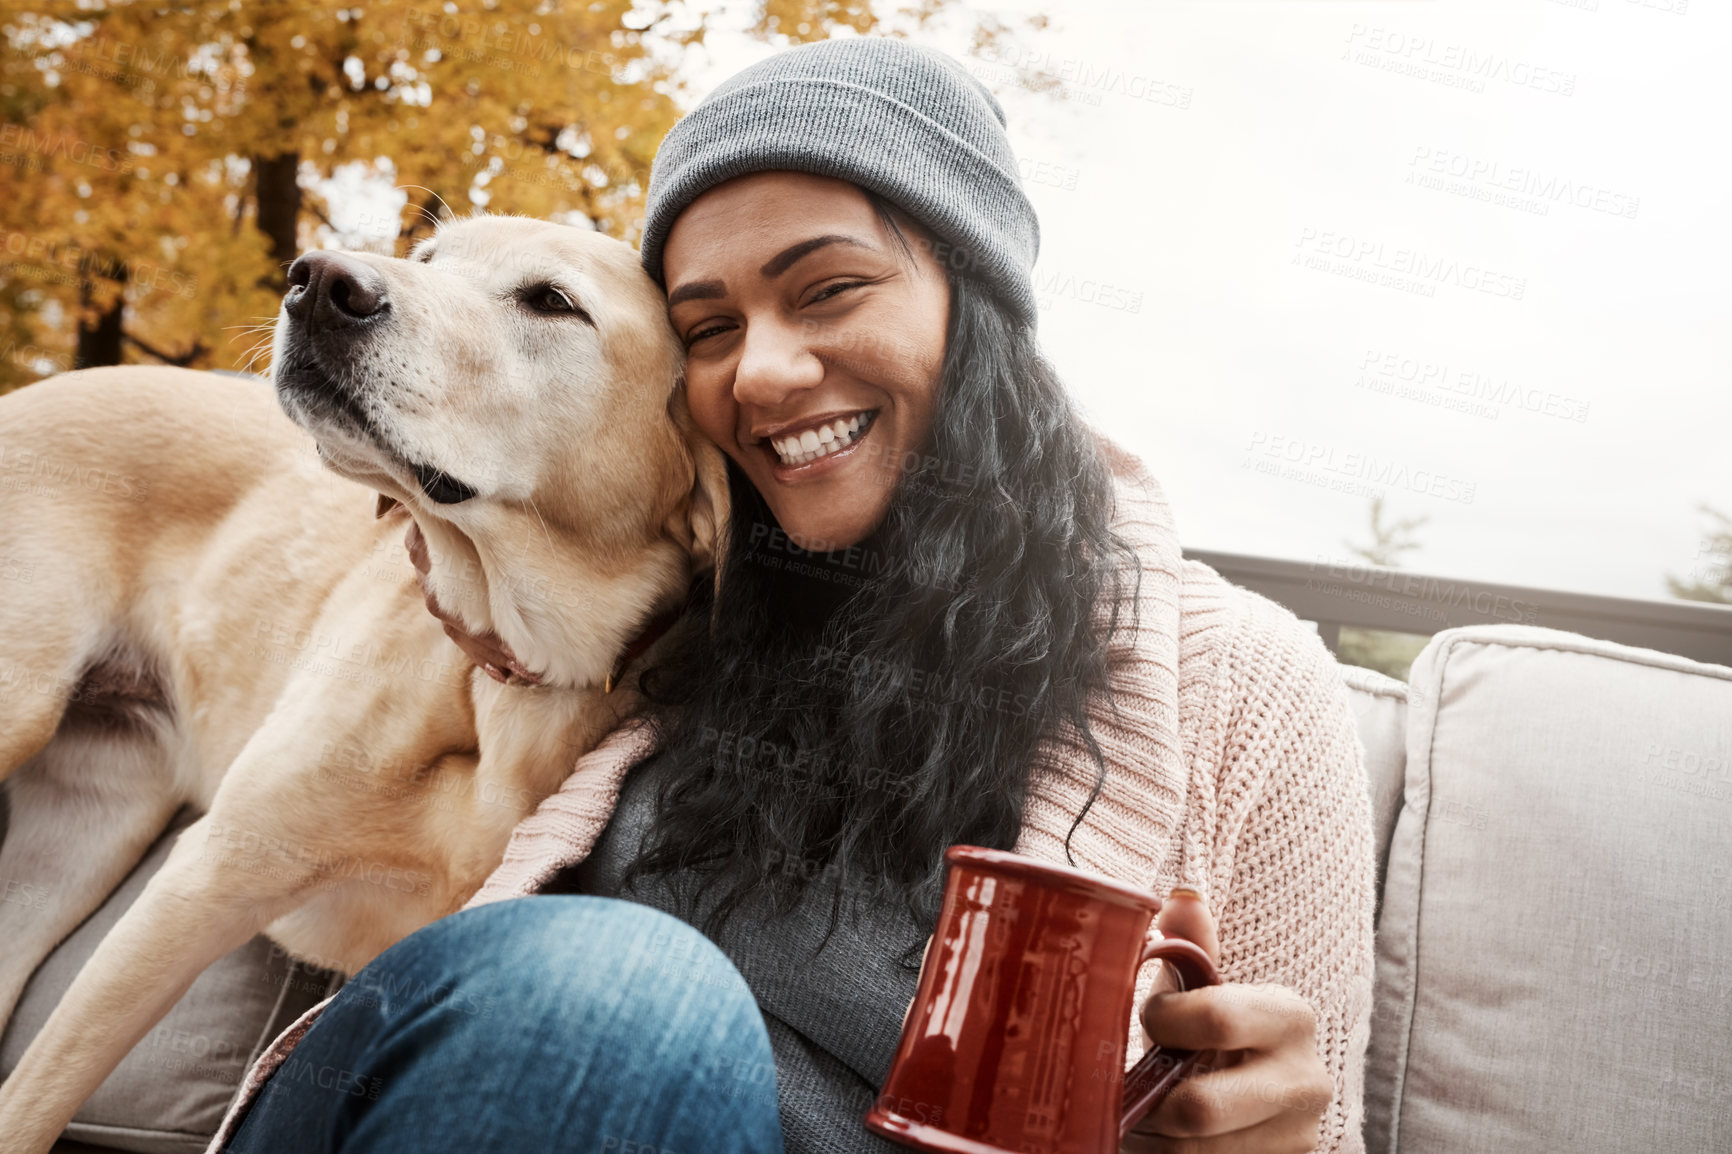 Buy stock photo Shot of a young woman relaxing with her dog outside